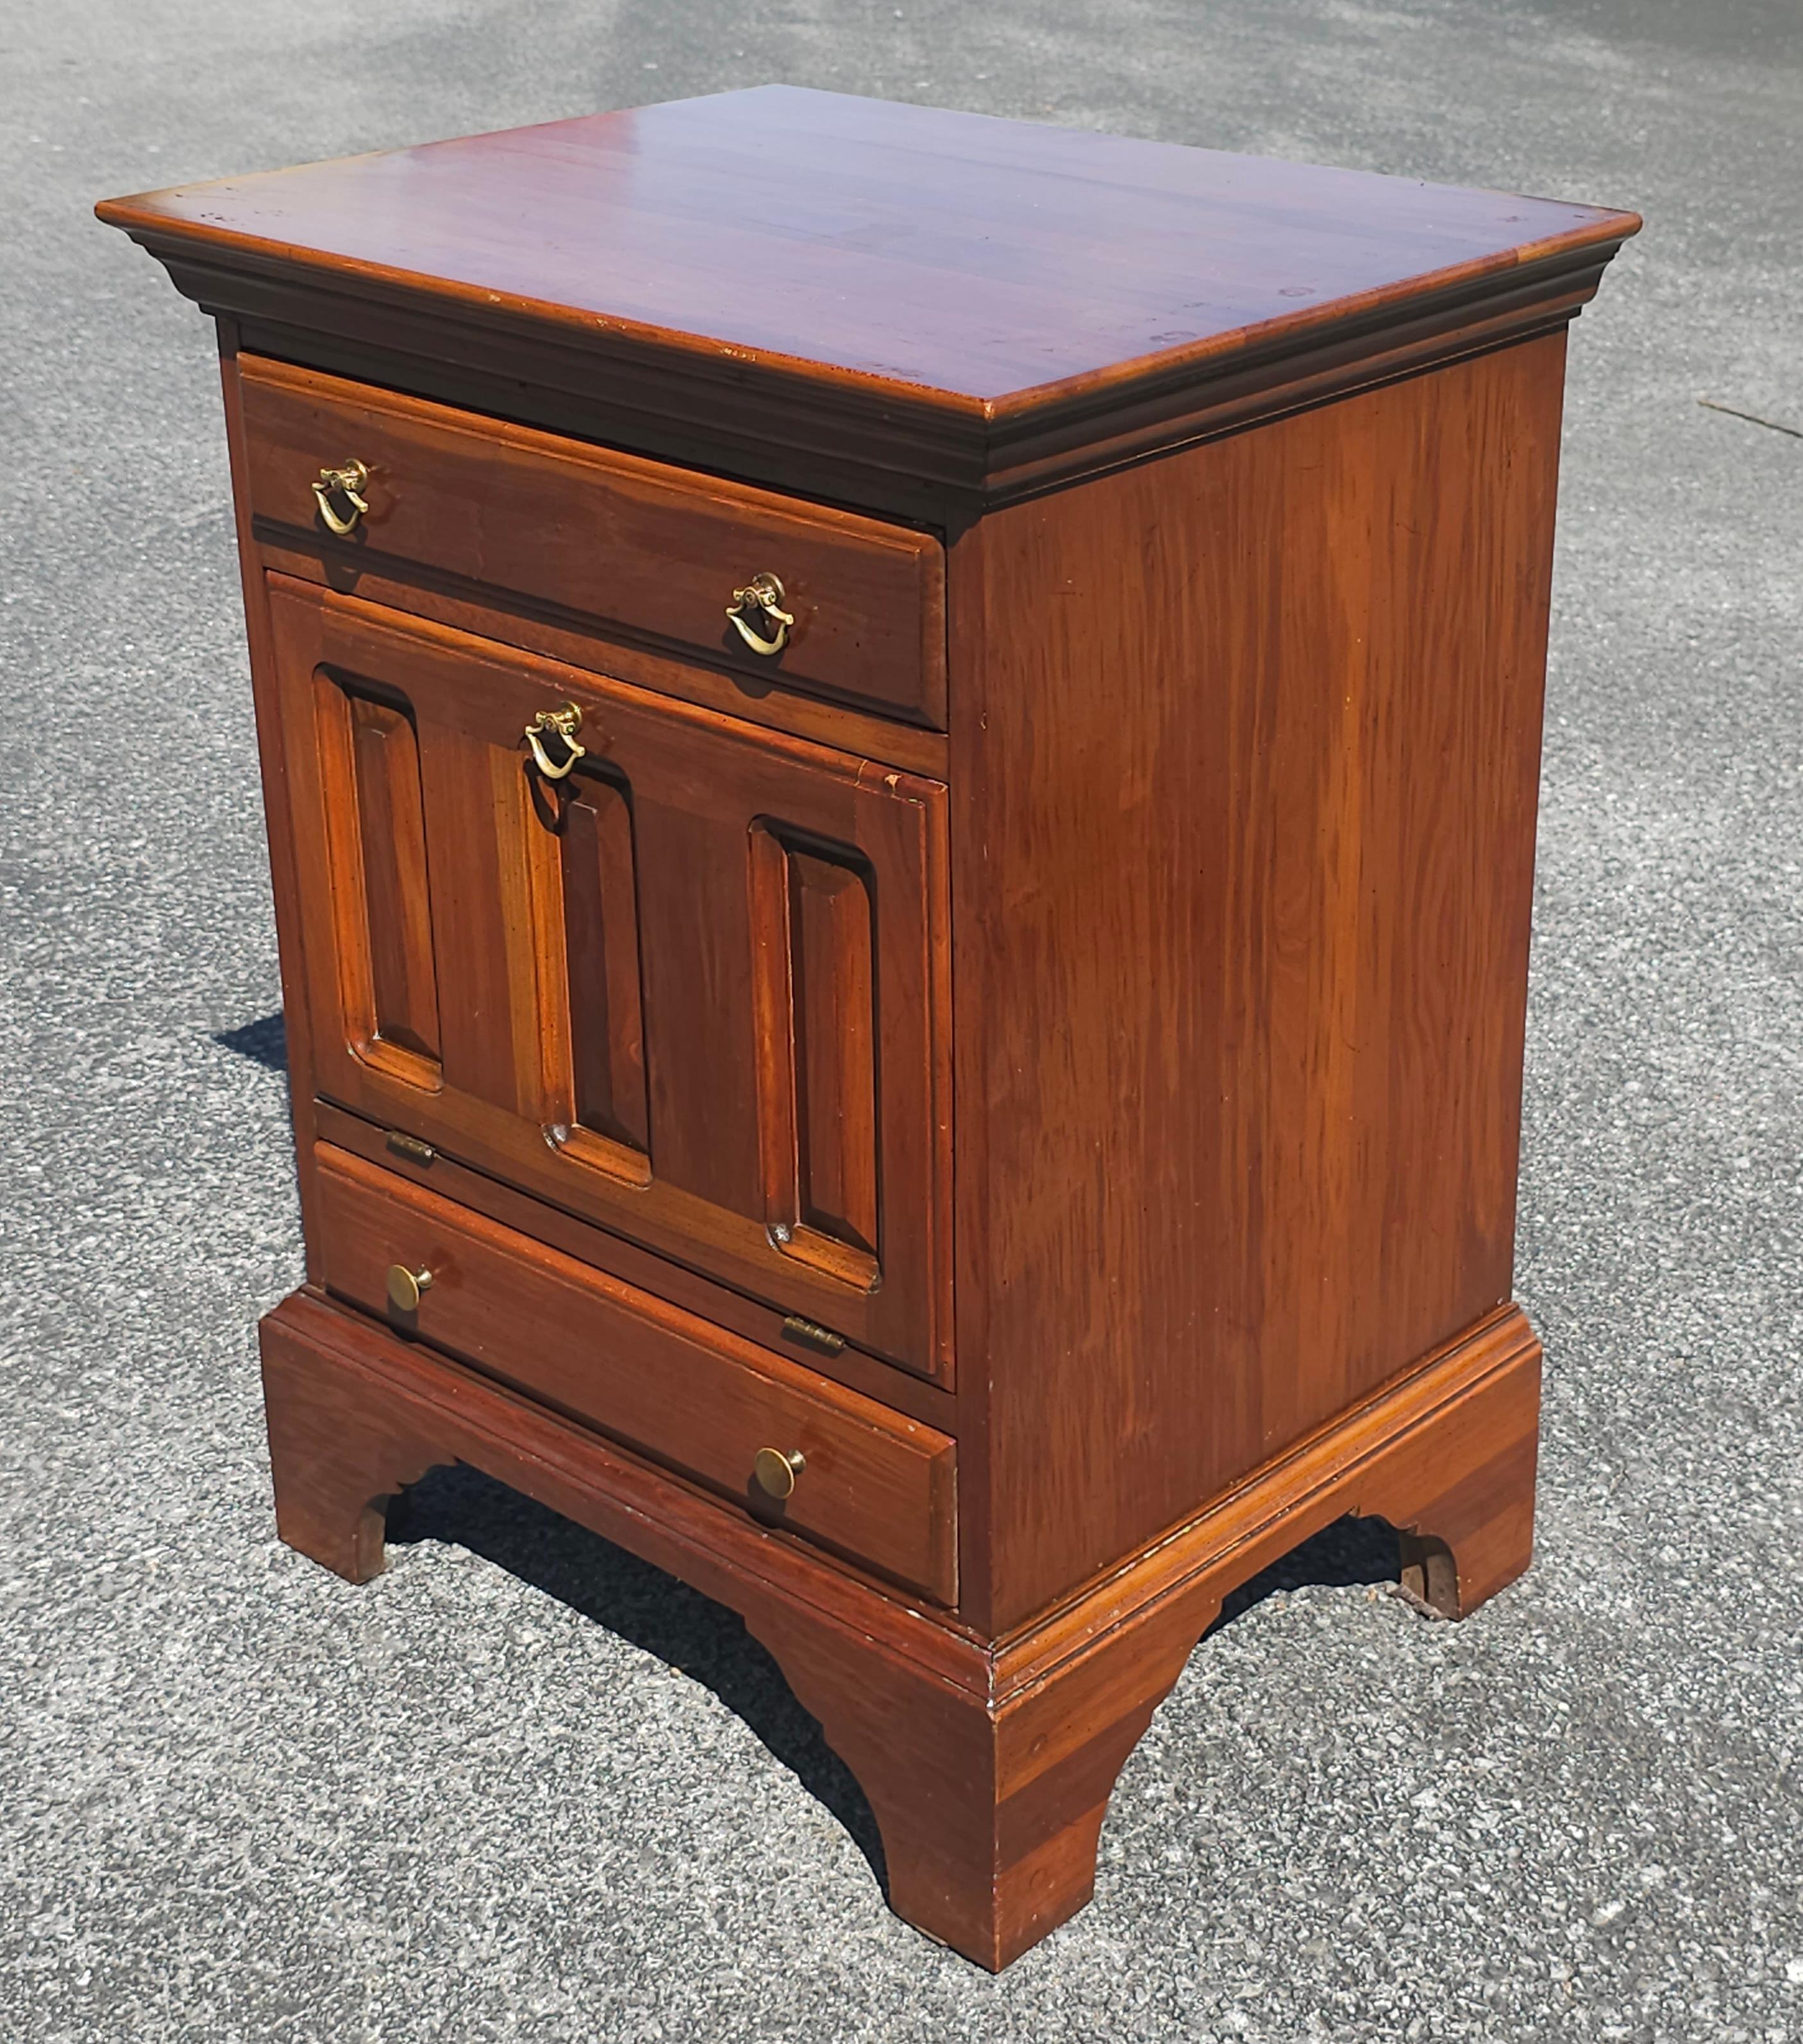 20th Century David Cabinet Cherry 2-Drawer a Abattant Door Bedside Cabinets Pair For Sale 6